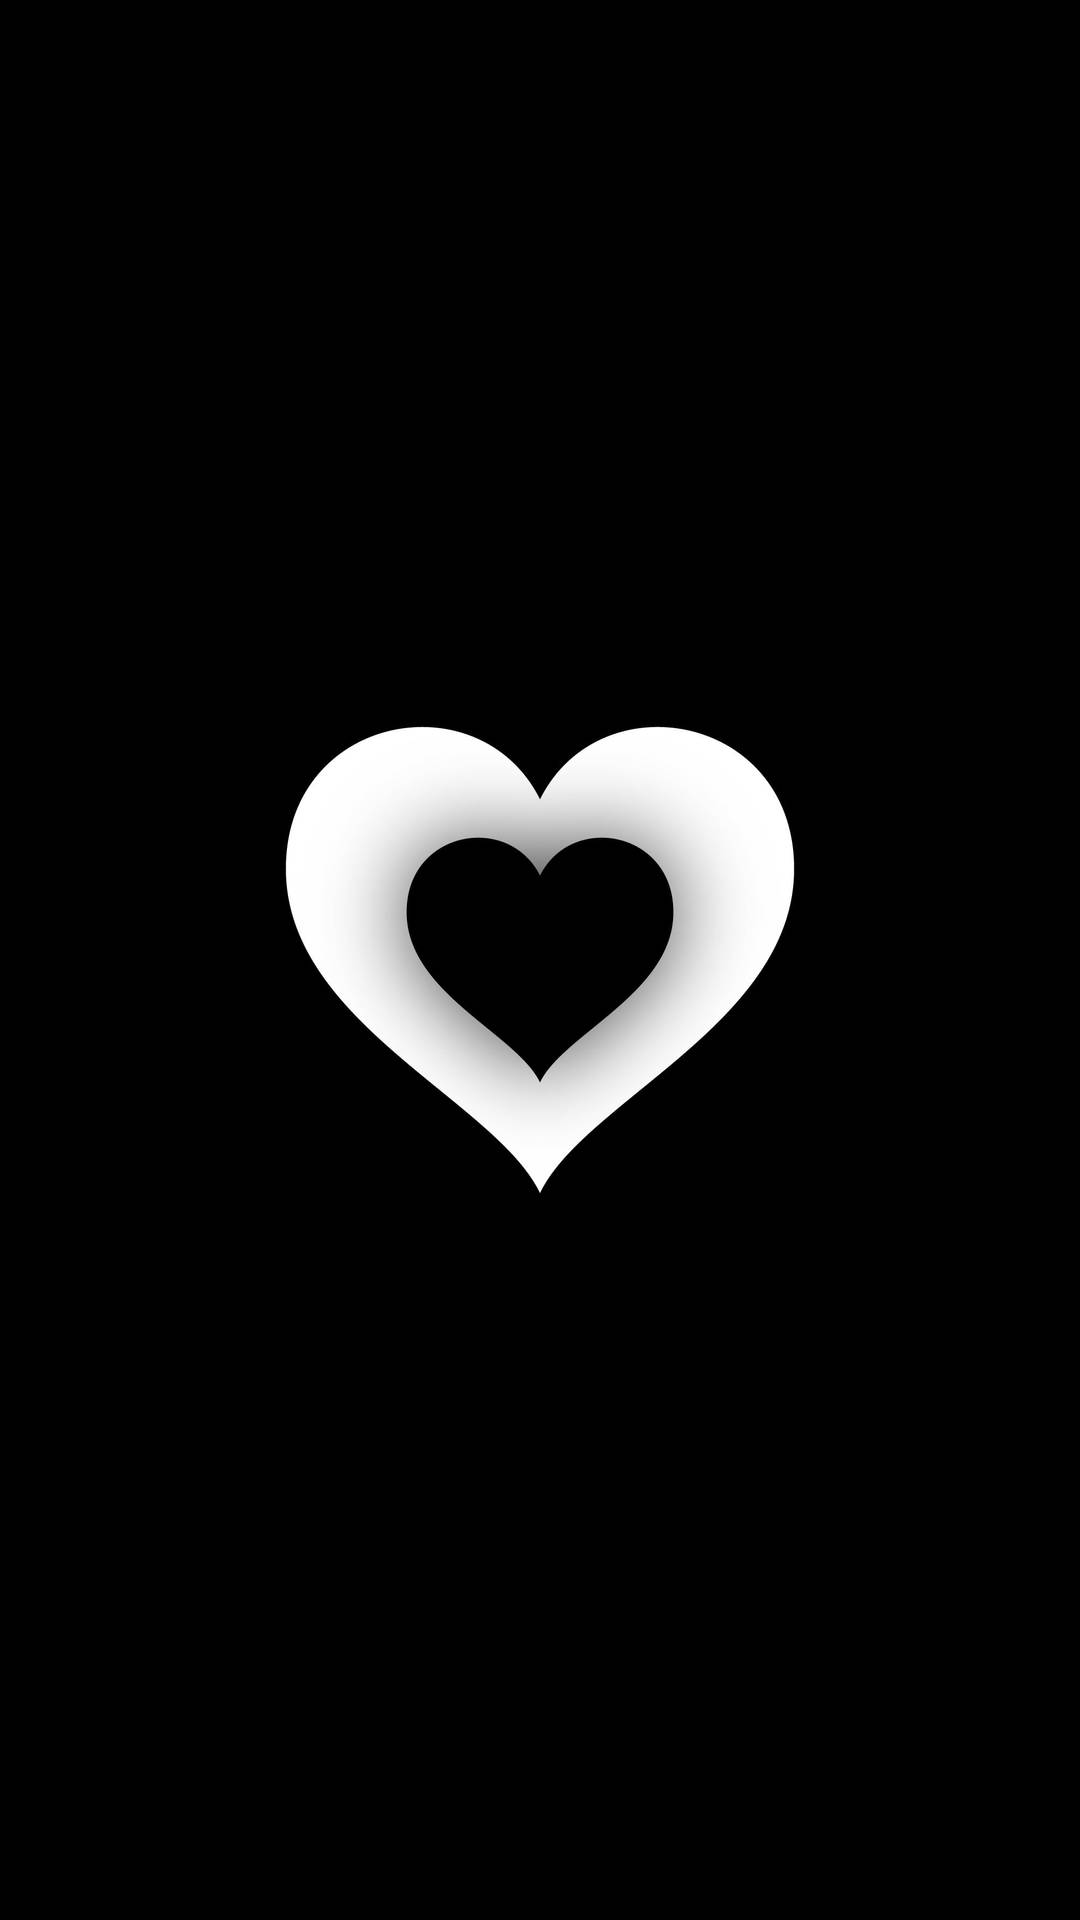 Double Black And White Heart